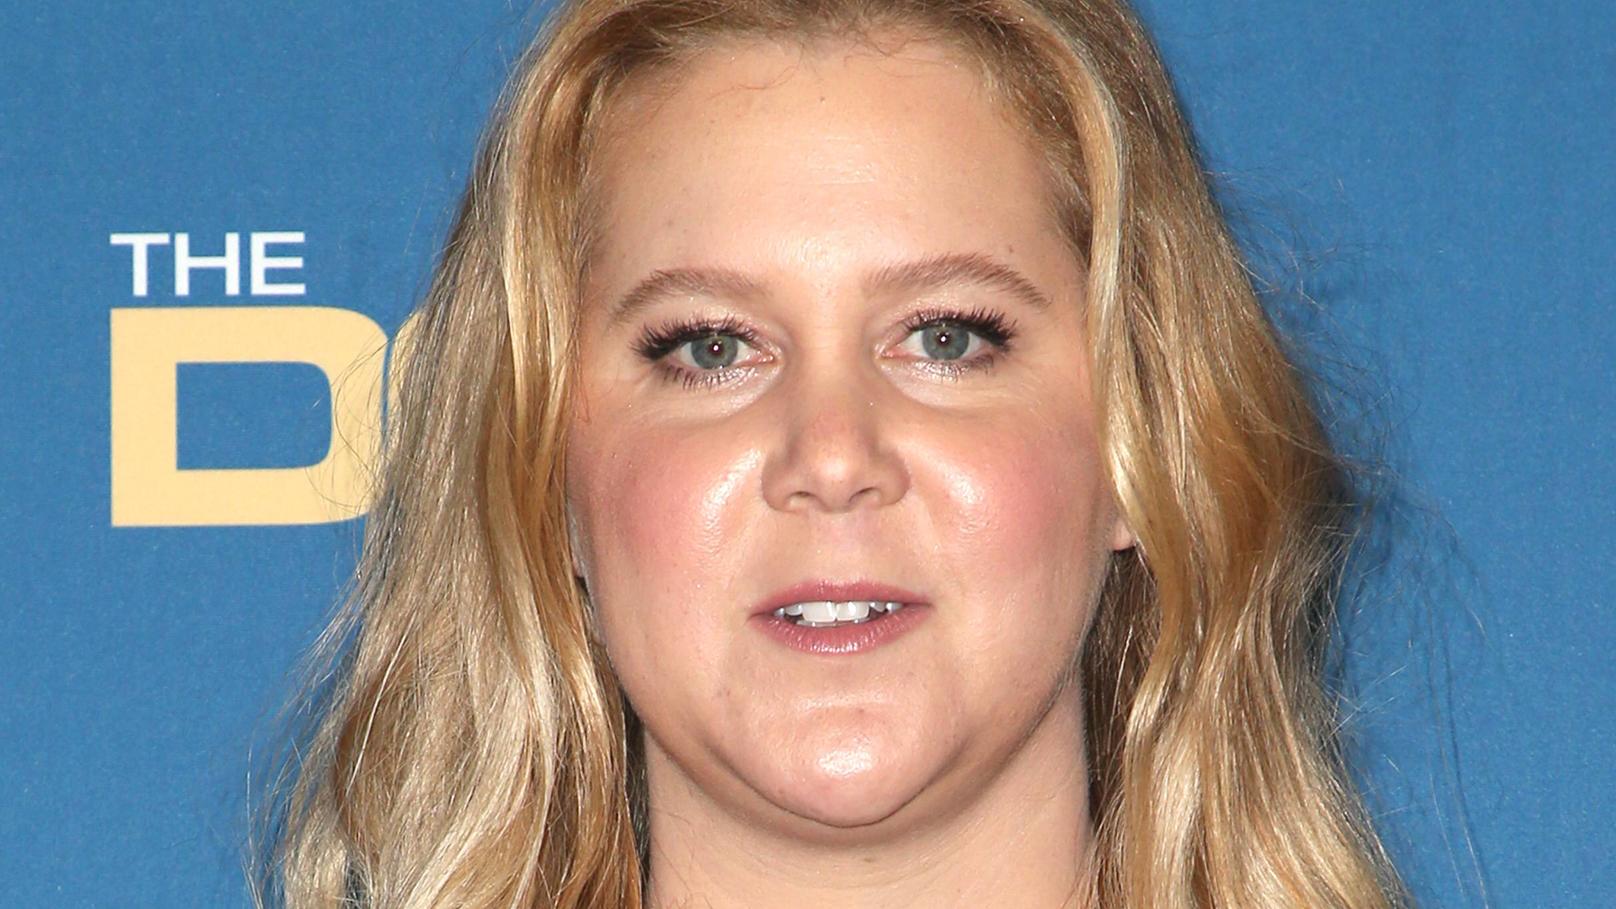 BEVERLY HILLS, CA - FEBRUARY 3: Amy Schumer in the press room at the 70th Annual DGA Awards at The Beverly Hilton Hotel in Beverly Hills, California on February 3, 2018. PUBLICATIONxINxGERxSUIxAUTxONLY Copyright: xFayexSadoux  